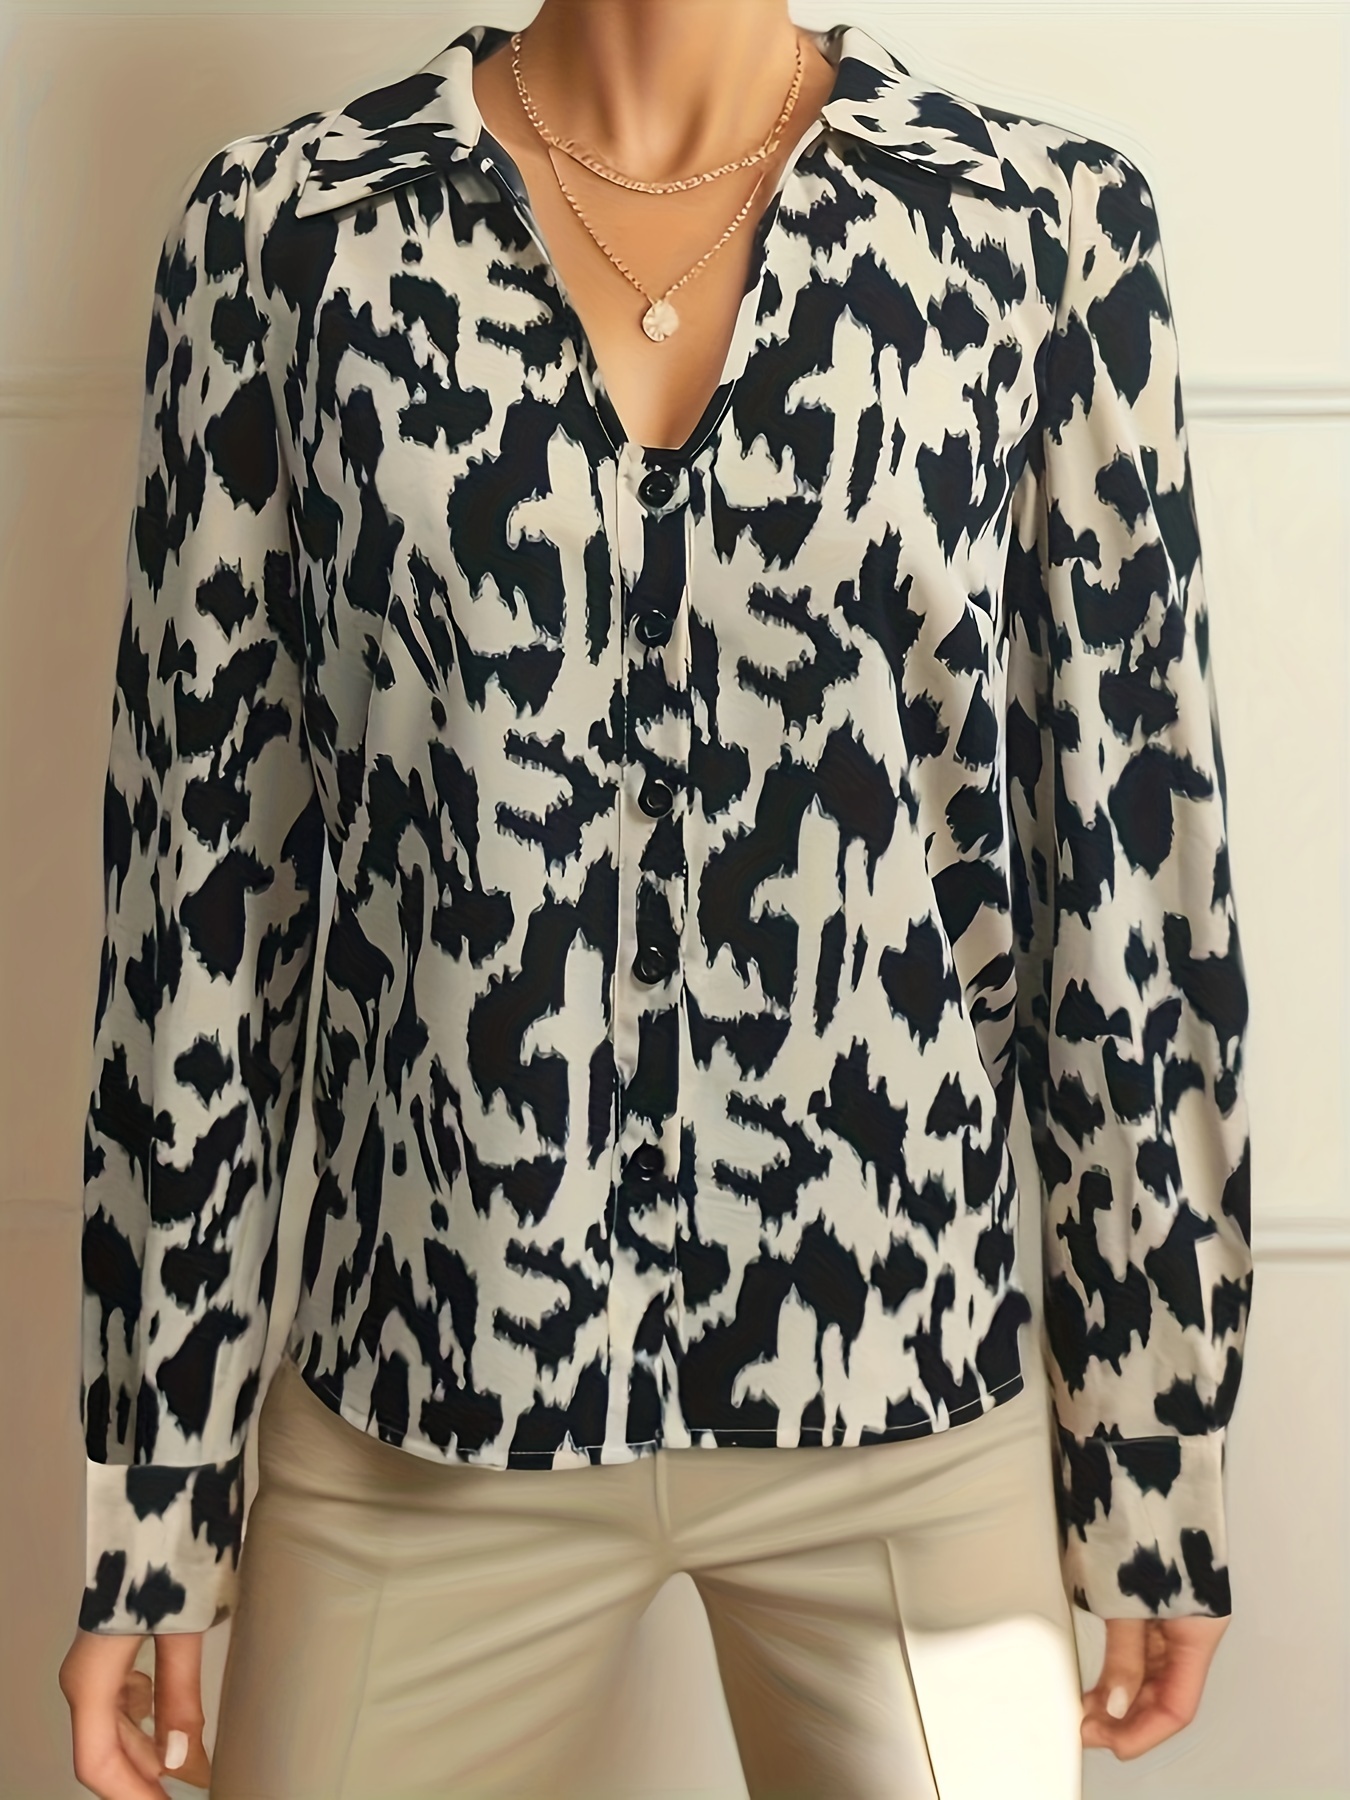  Scyoekwg My Order Placed by me Long Sleeve Shirts for Women  Dressy Casual V Neck Button Down Blouse Fall Leopard Print Regular Fit  Tunic Tops : Sports & Outdoors